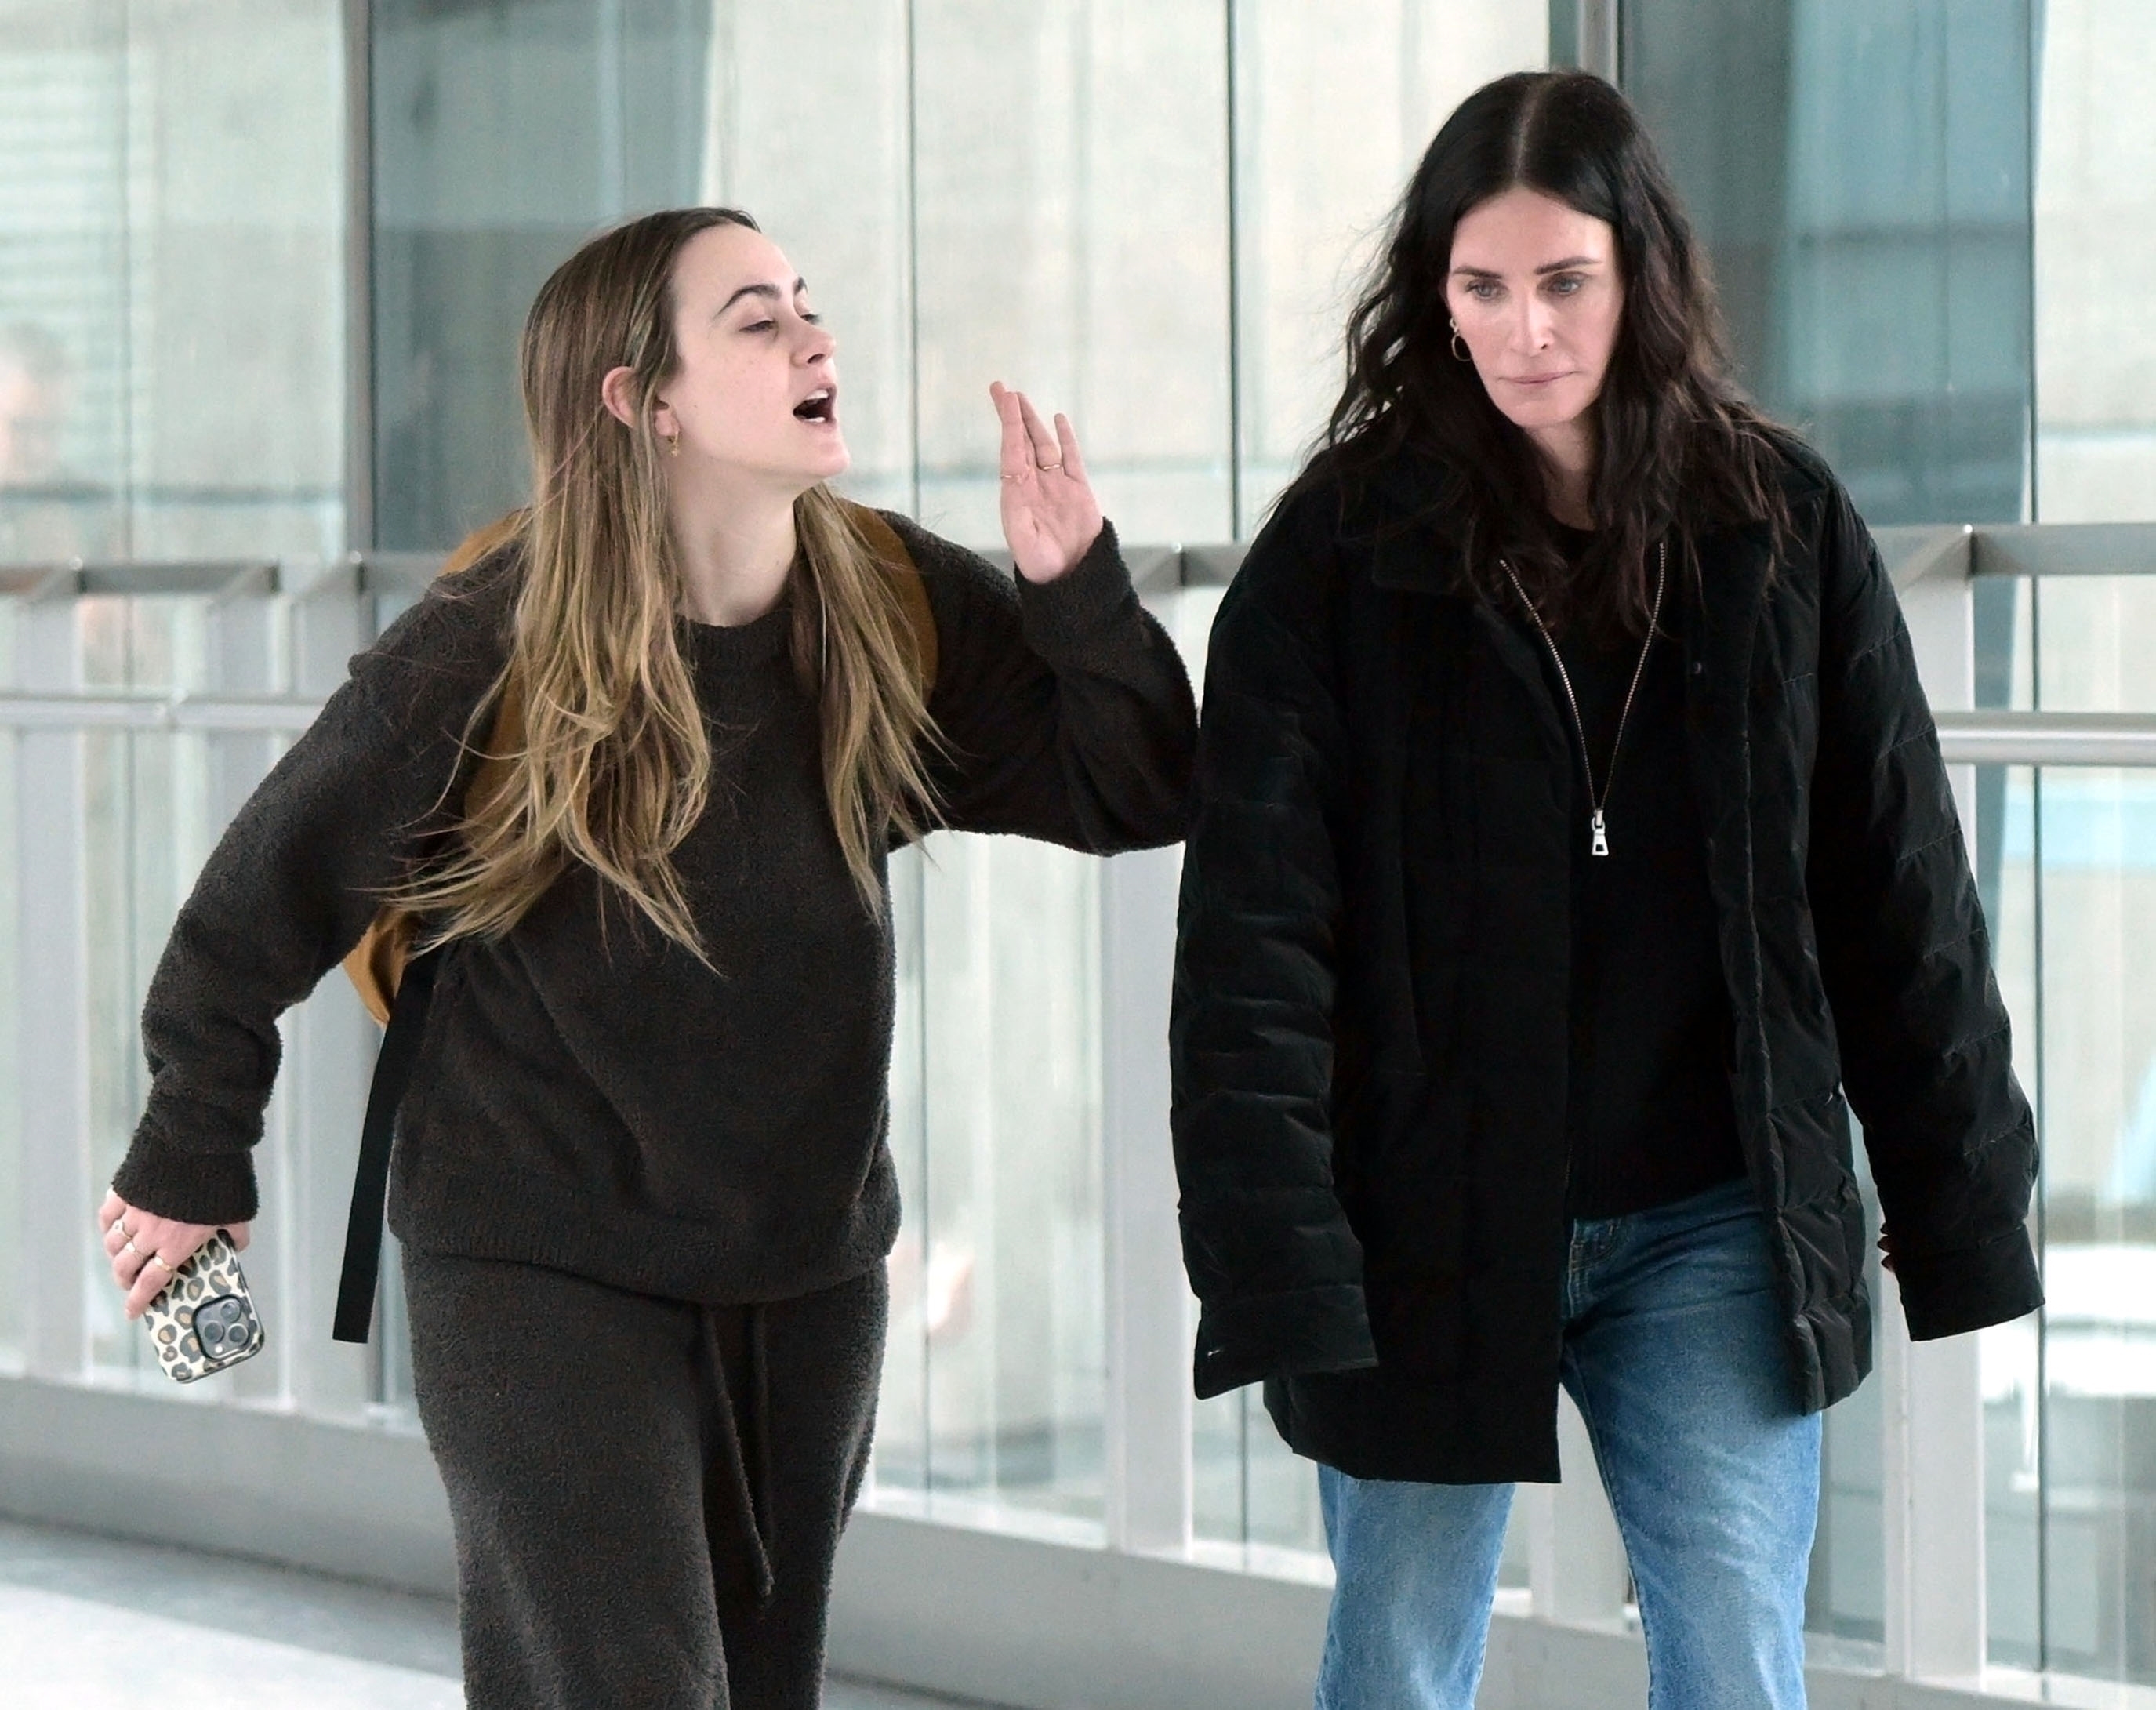 Courteney Cox and Coco Arquette at Heathrow Airport